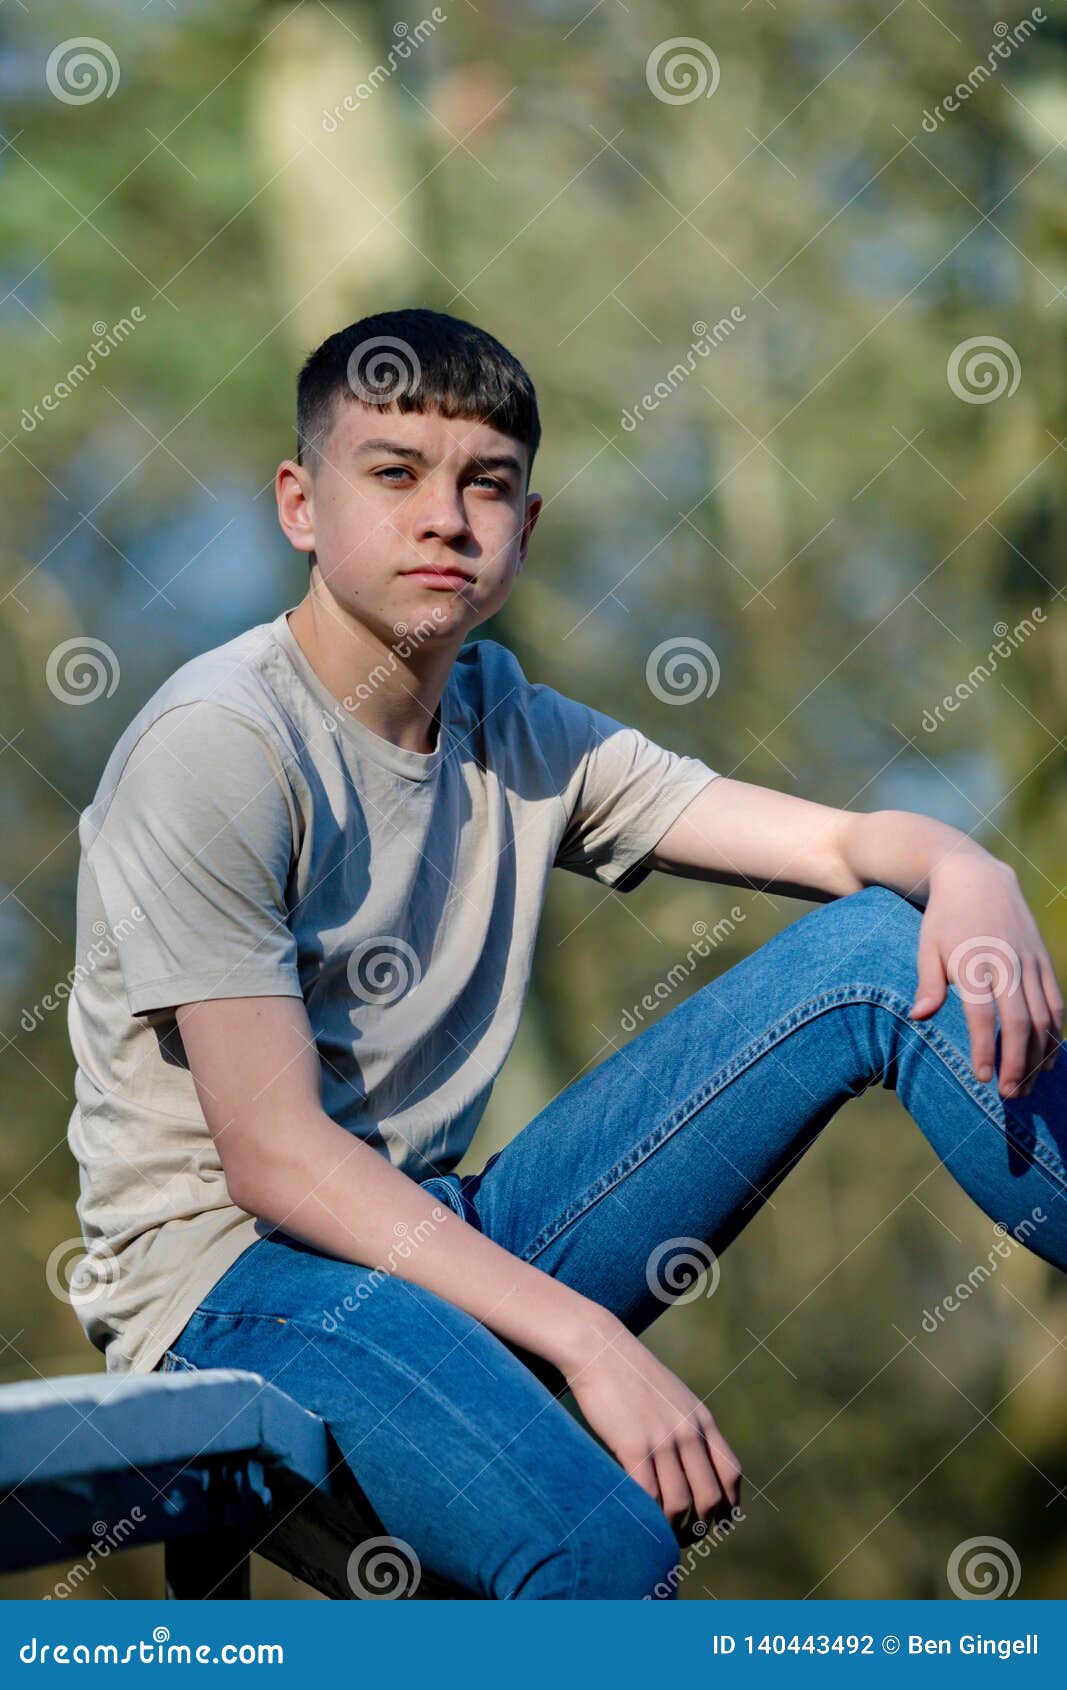 Teenage Boy Outside on a Bright Spring Day Stock Photo - Image of park ...